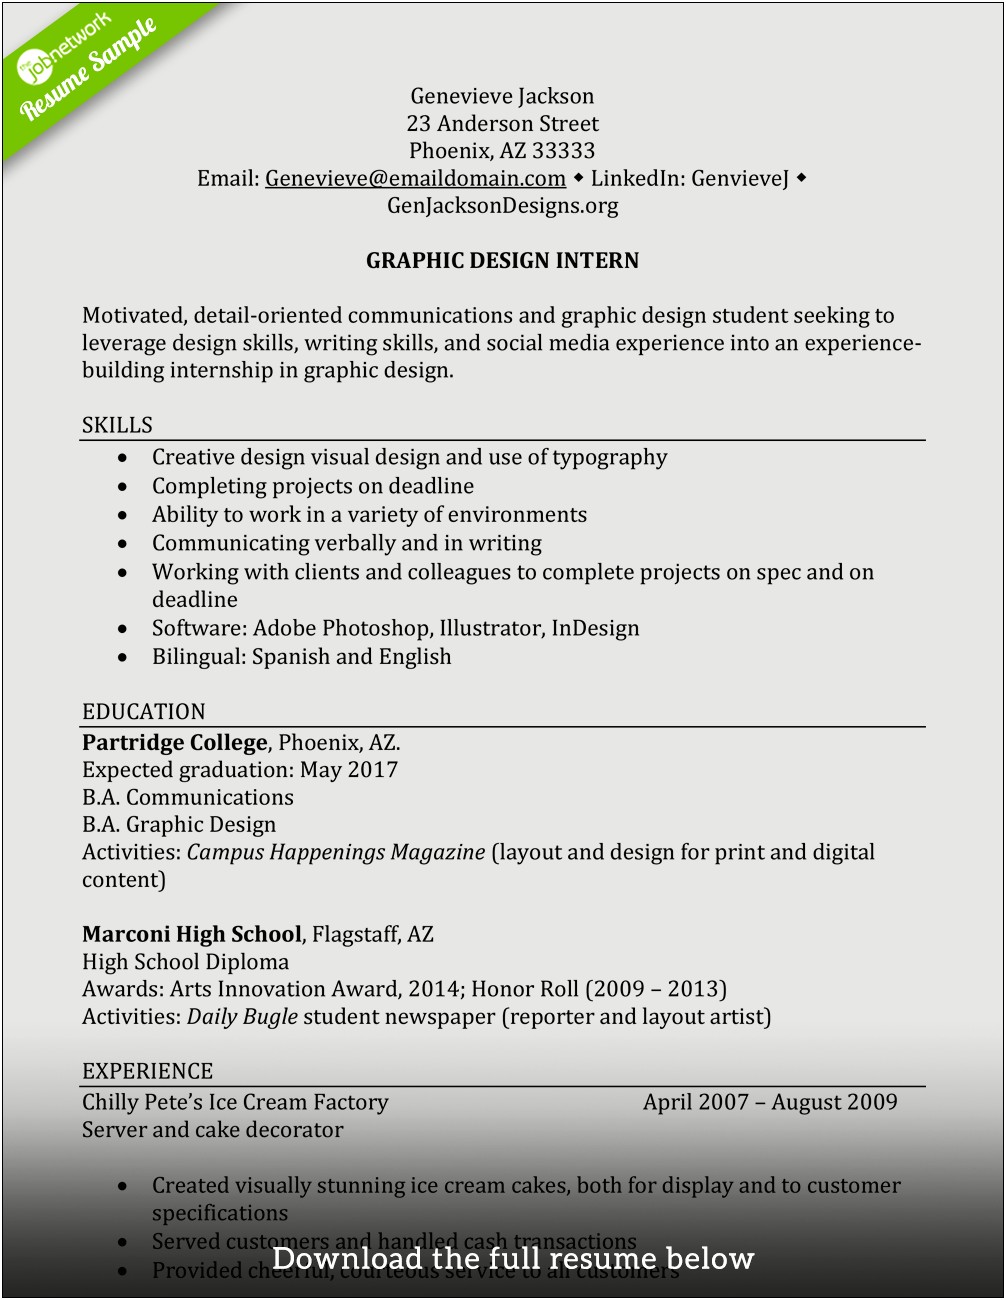 Free Resume For Students With No Experience